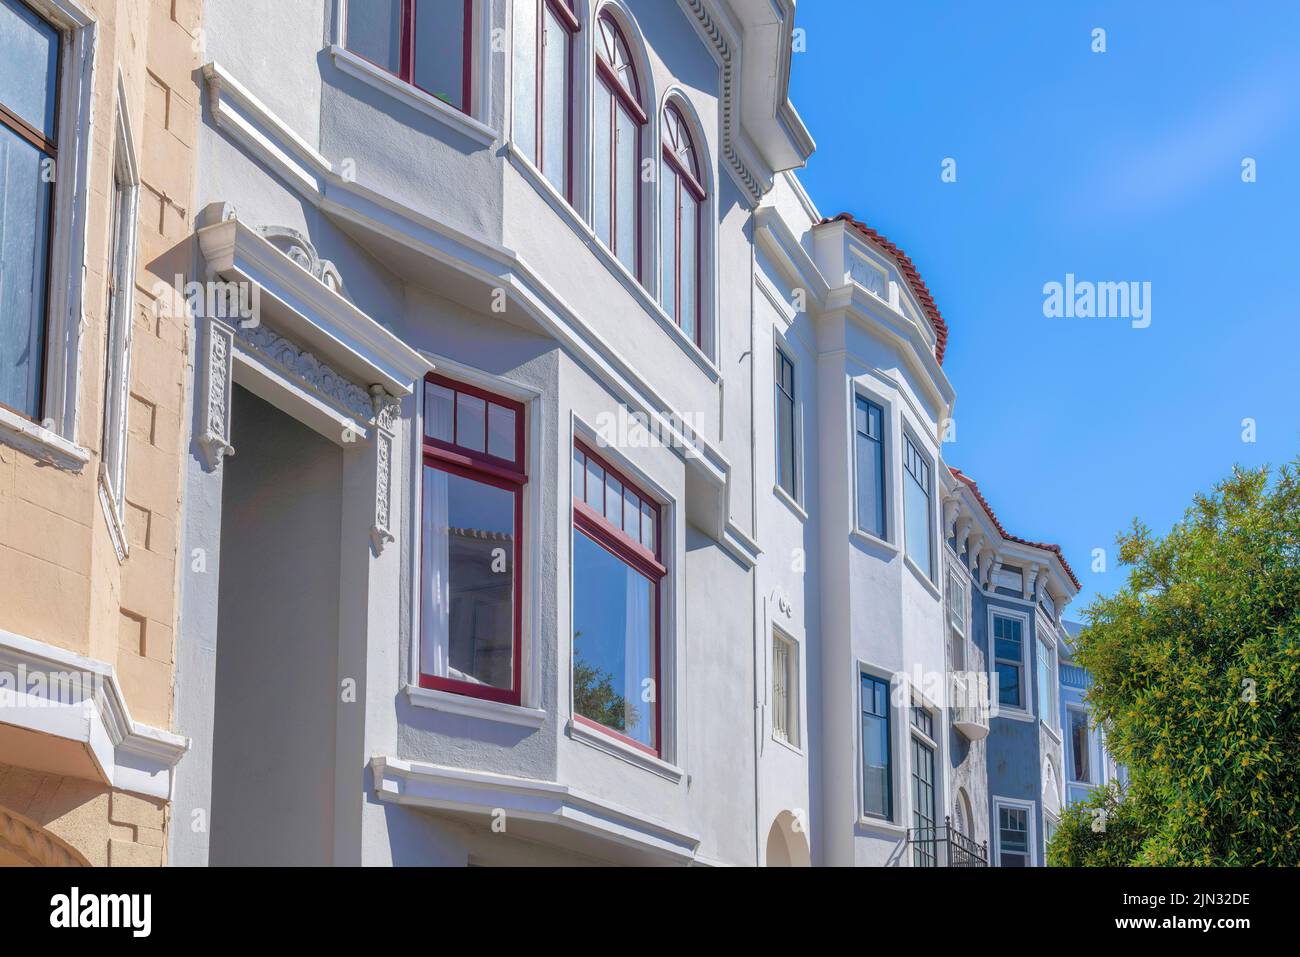 Rowhouses side view with painted walls across the trees against the sky in San Francisco, CA. Exterior of residential buildings with decorative trims Stock Photo